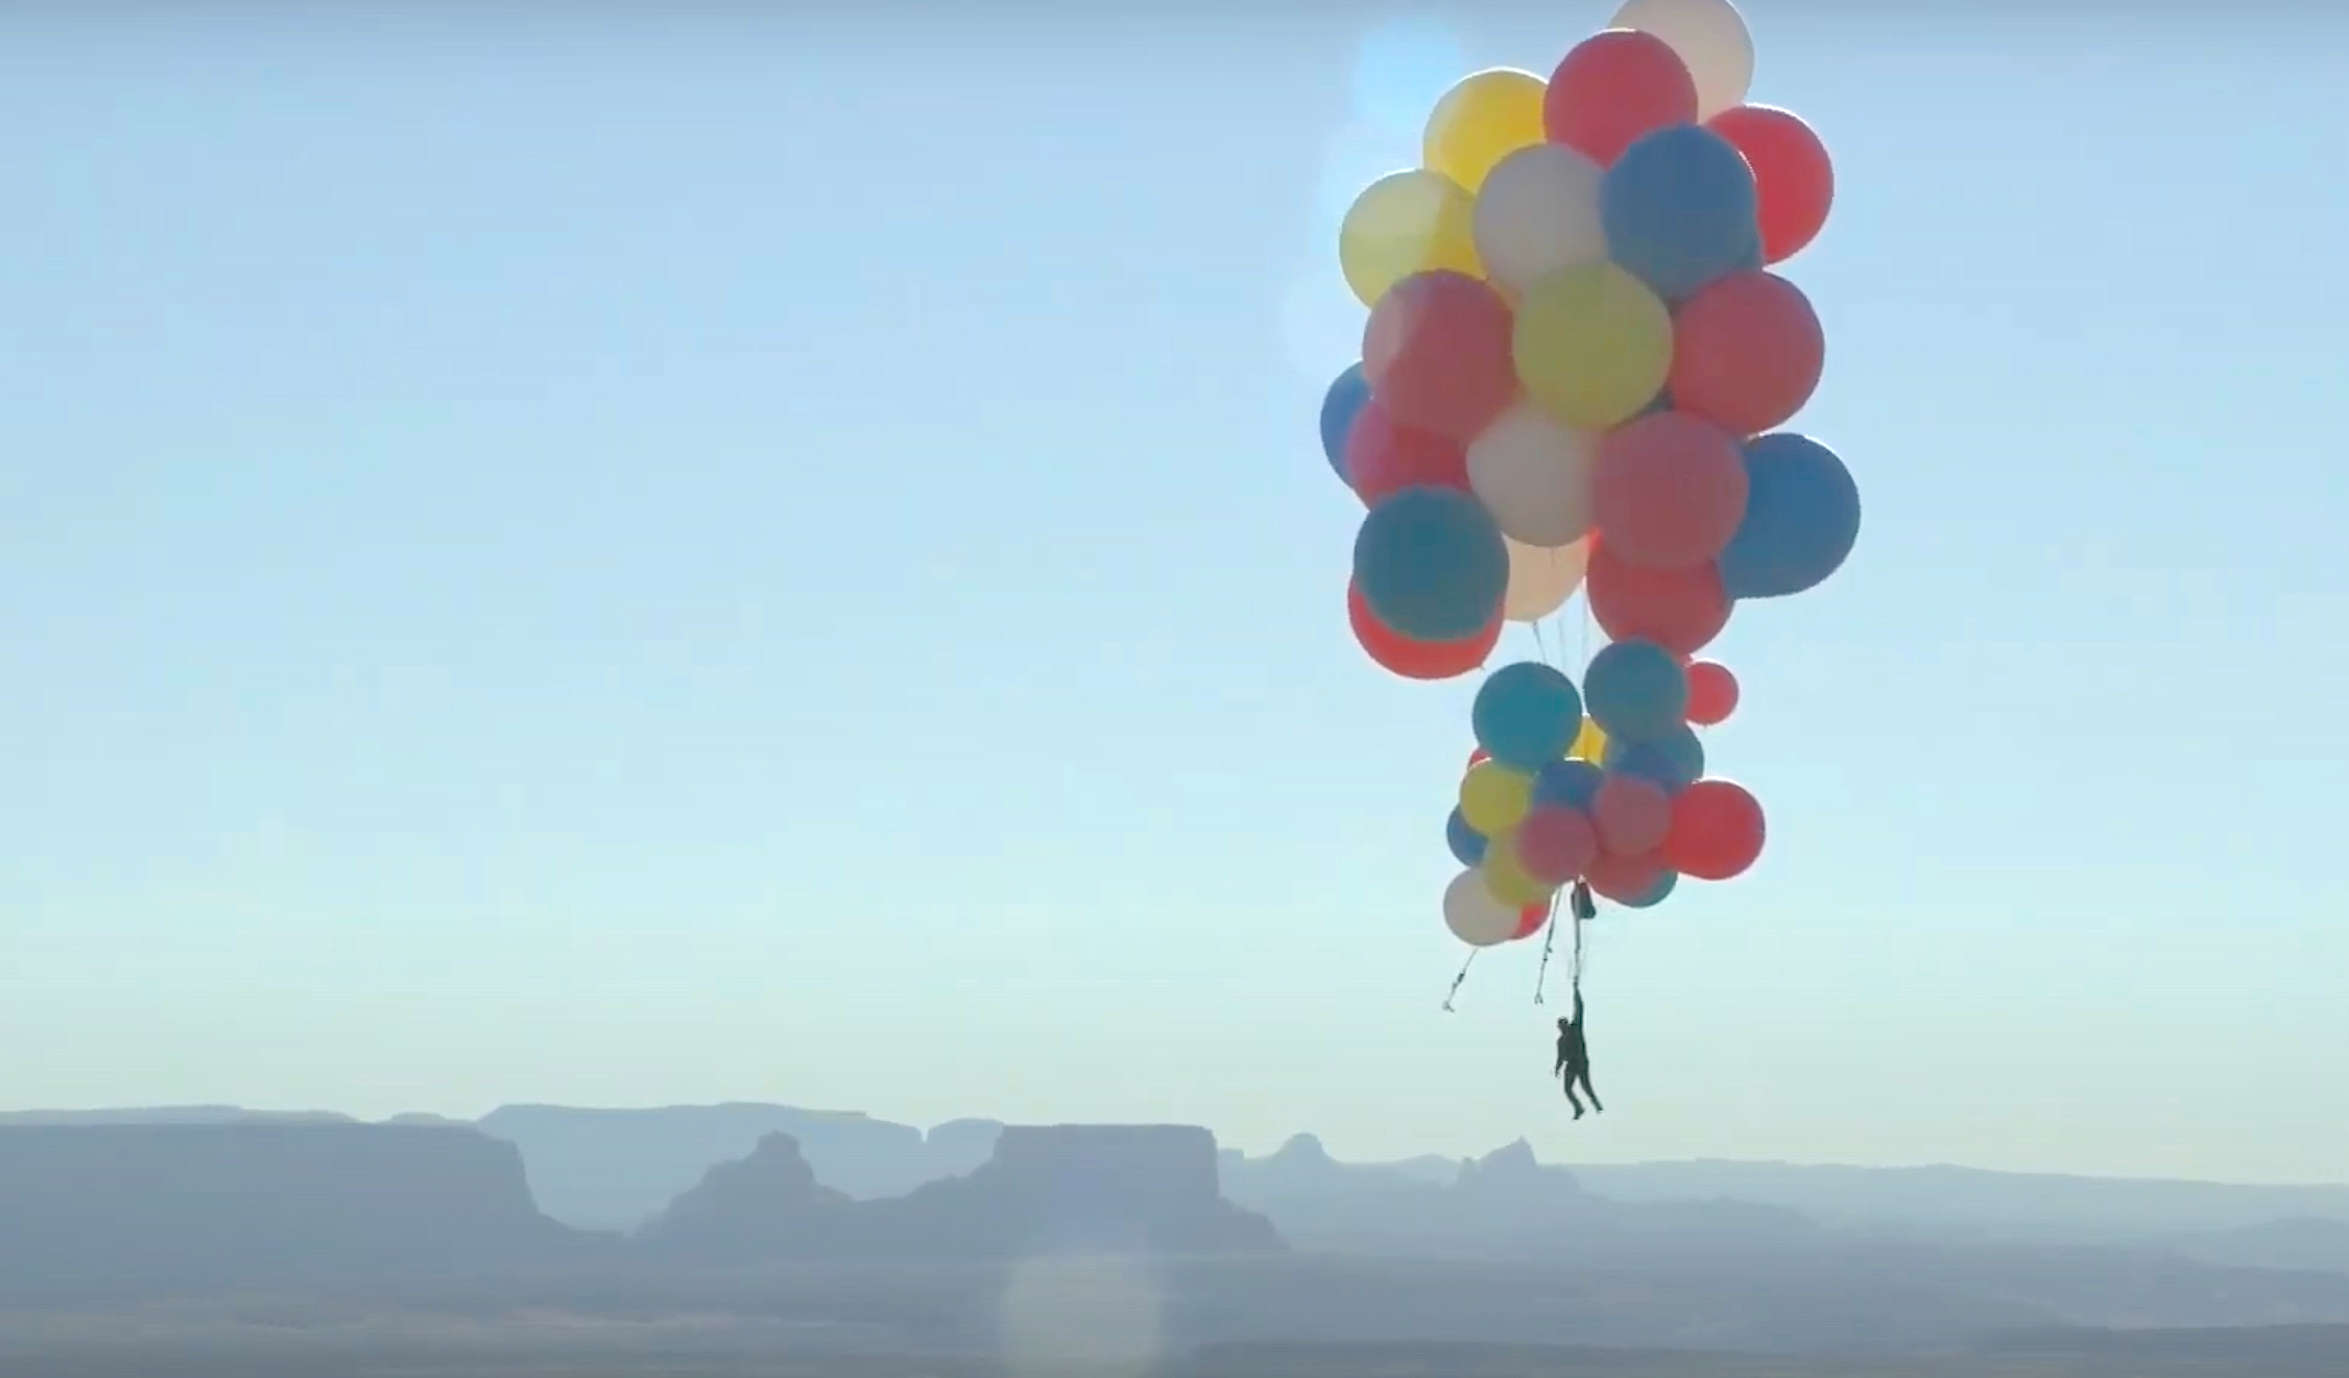 David Blaine soars with balloons in Ascension YouTube stunt